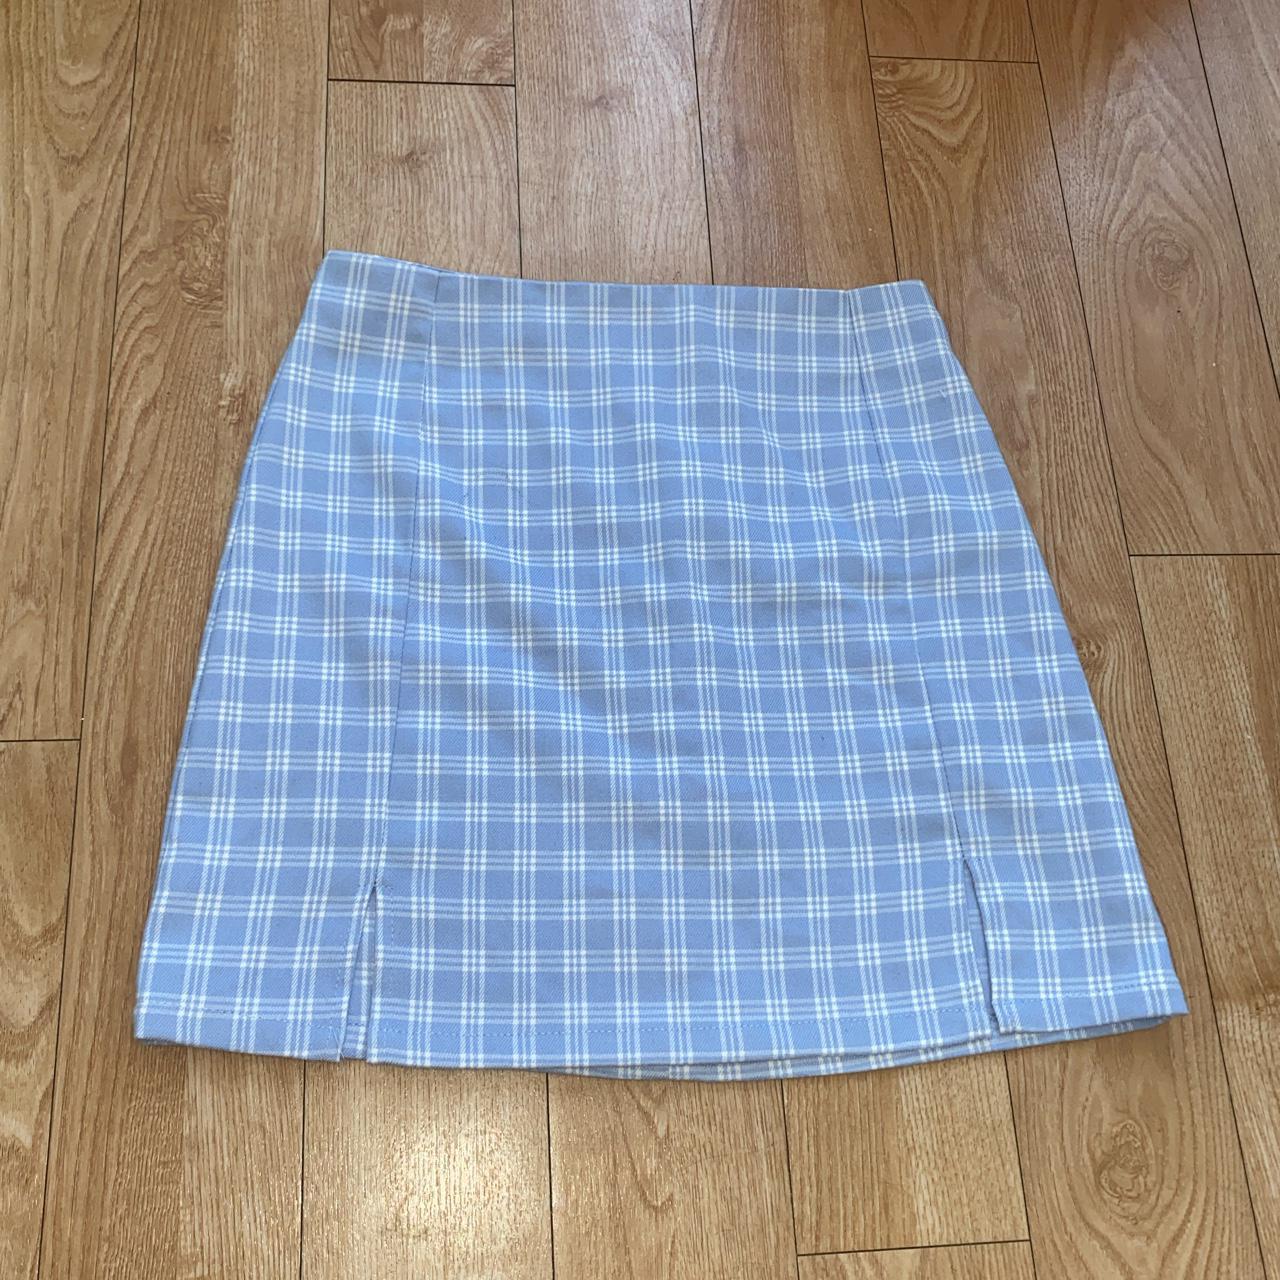 SHEIN mini skirt in a checked white and blue with... - Depop